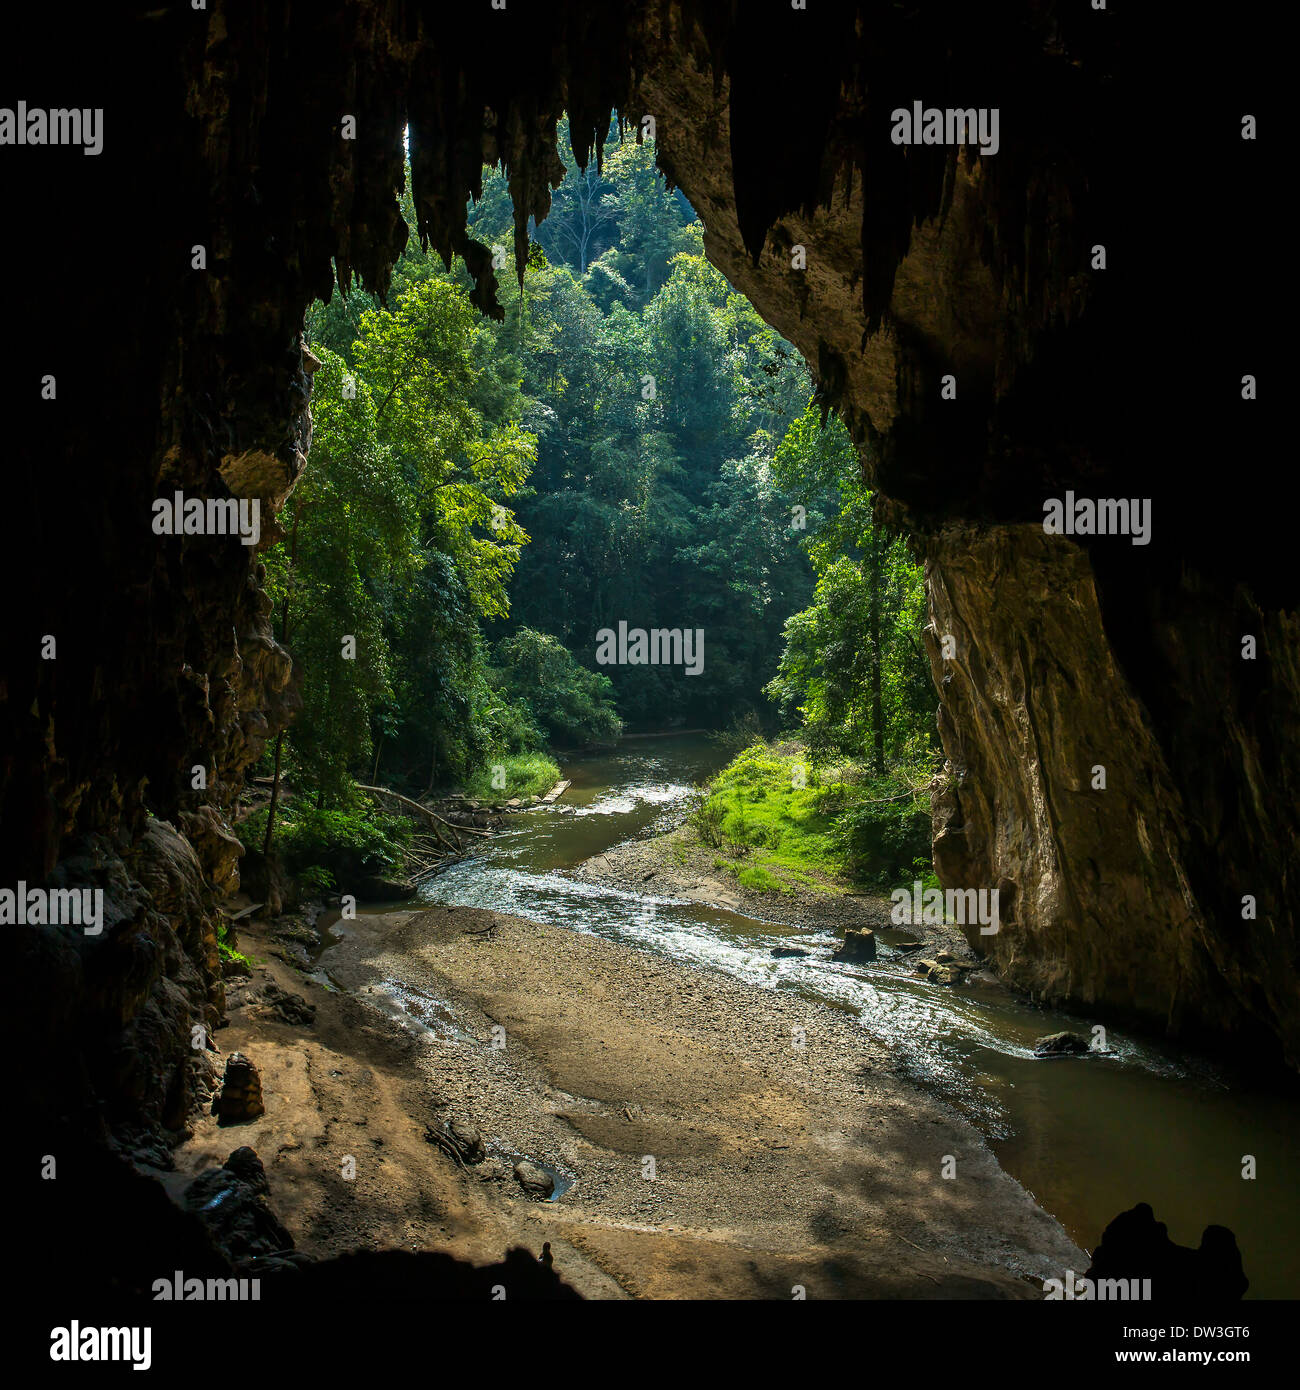 LOD Höhle in Sappong, Nord-Thailand Stockfoto